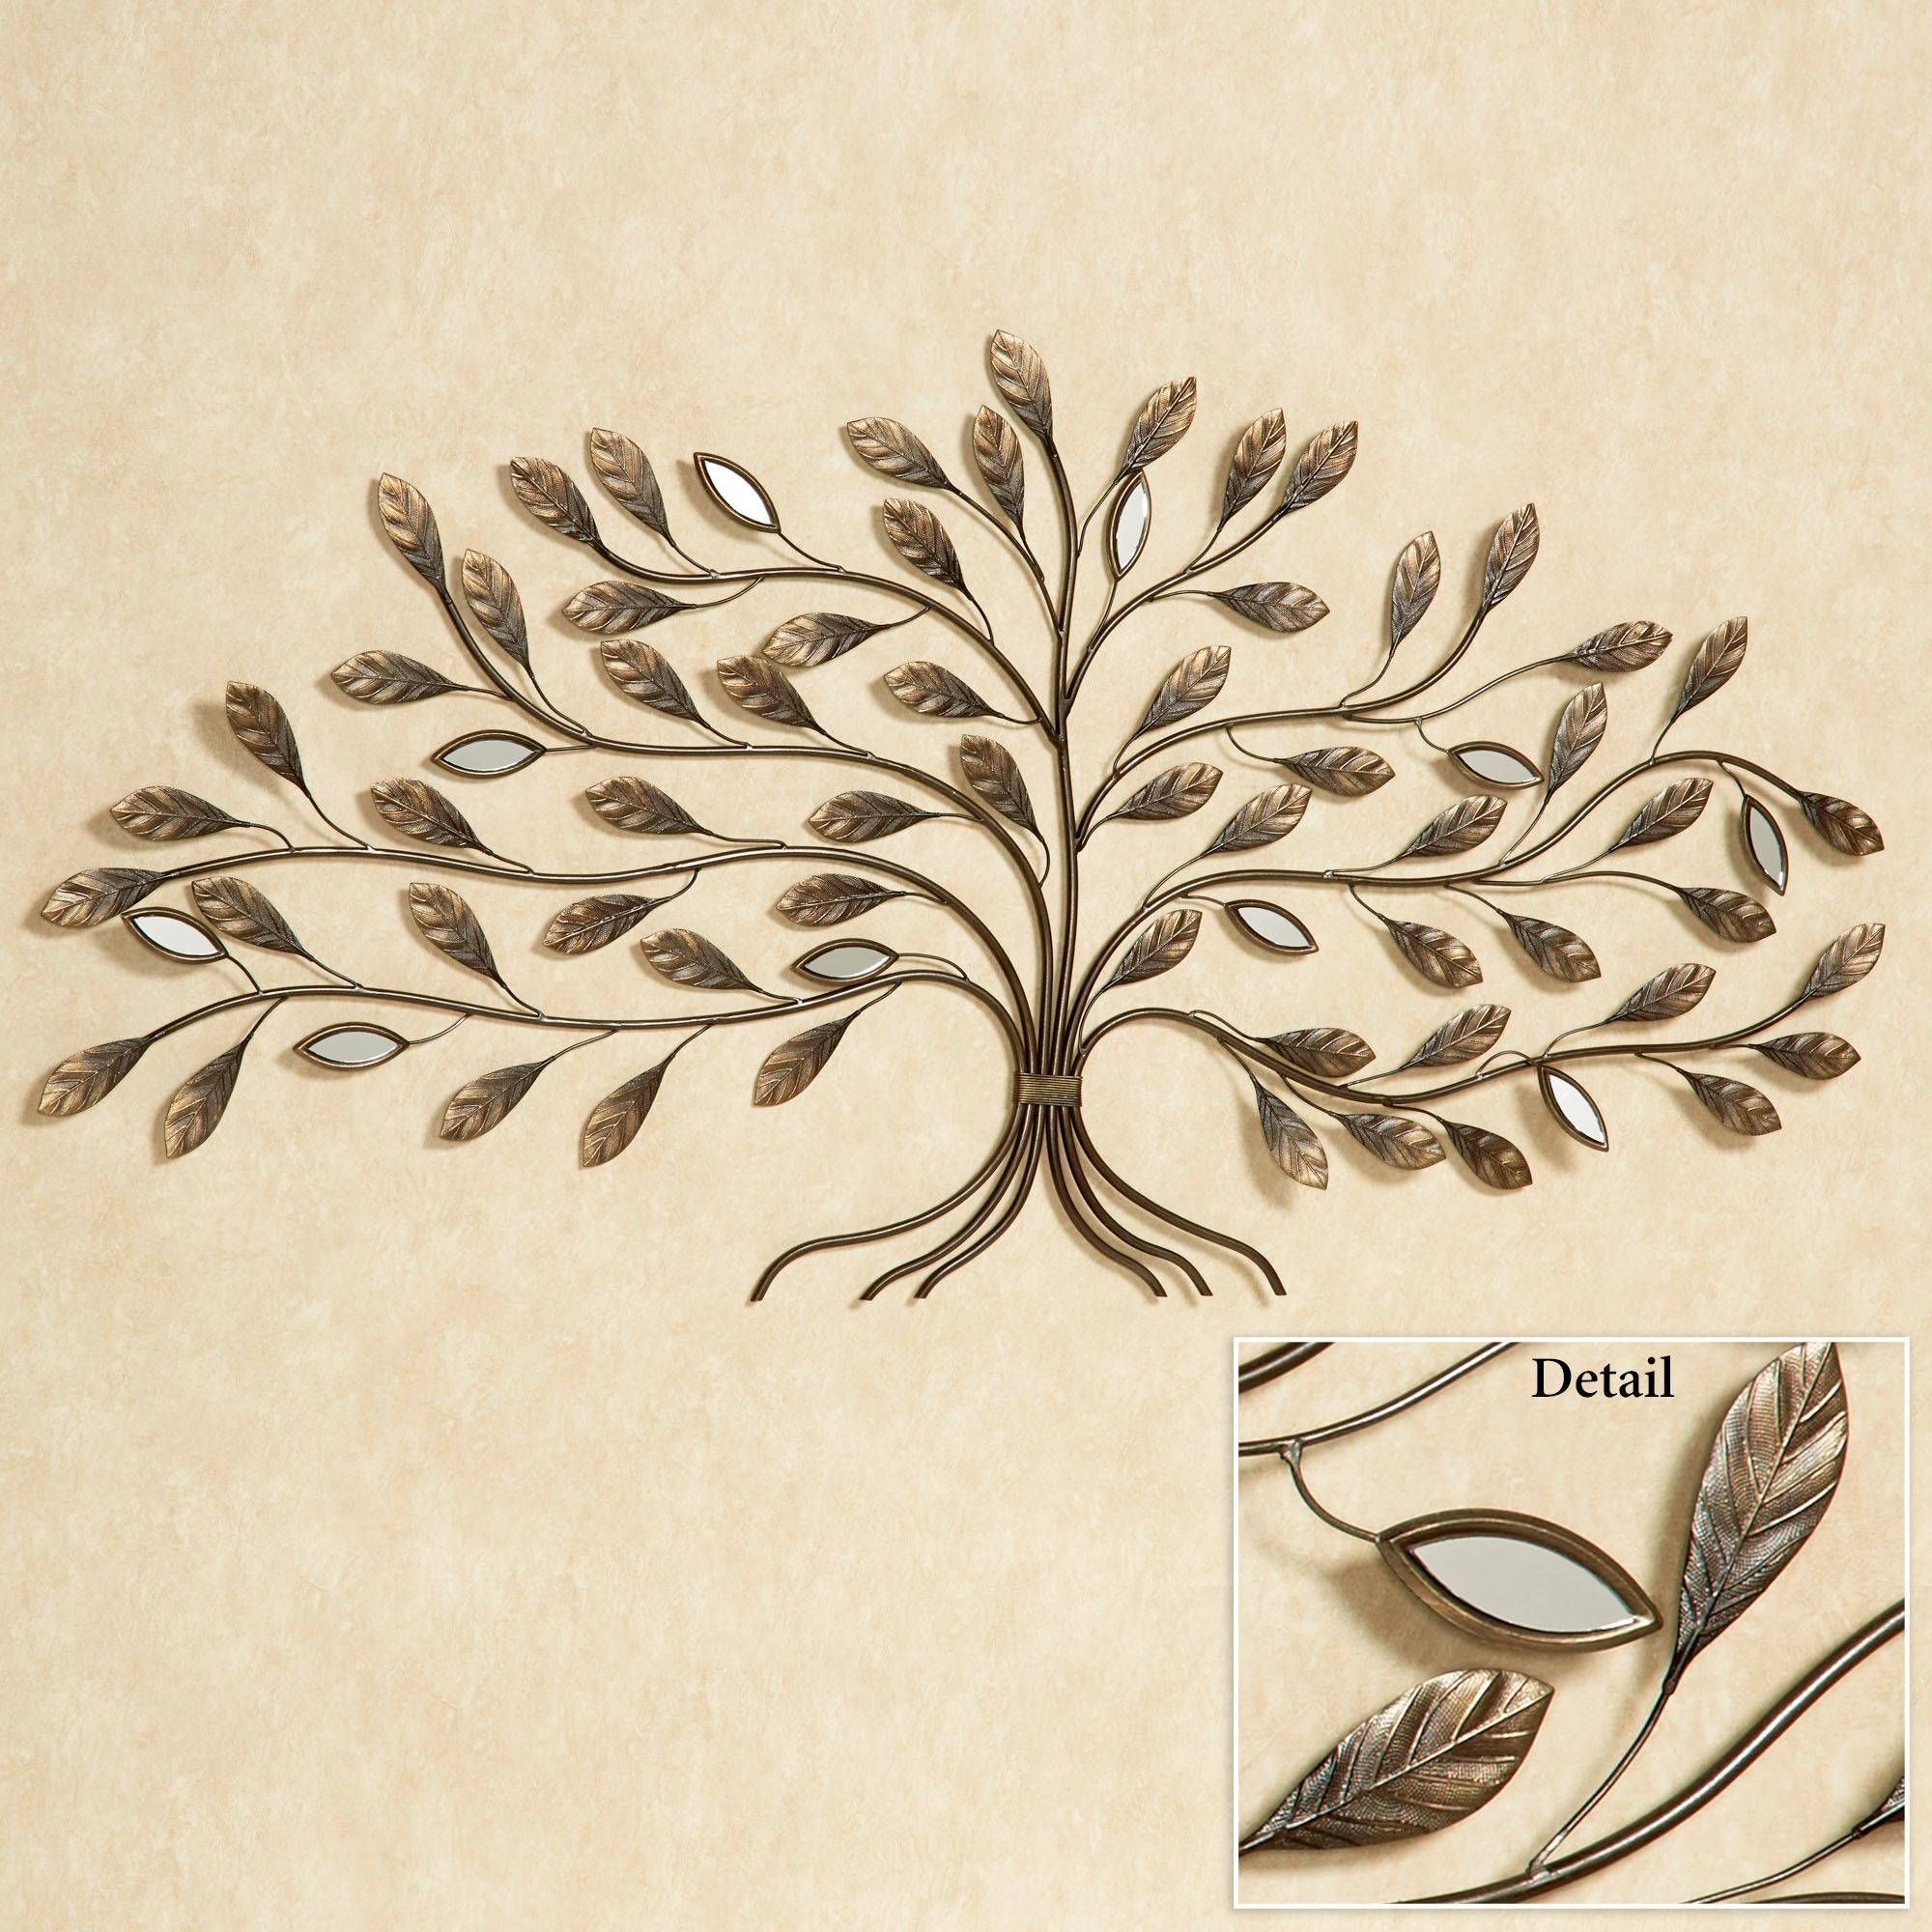 Marielle Tree Metal Wall Art Pertaining To Most Recent Metal Wall Art Tree (View 17 of 20)